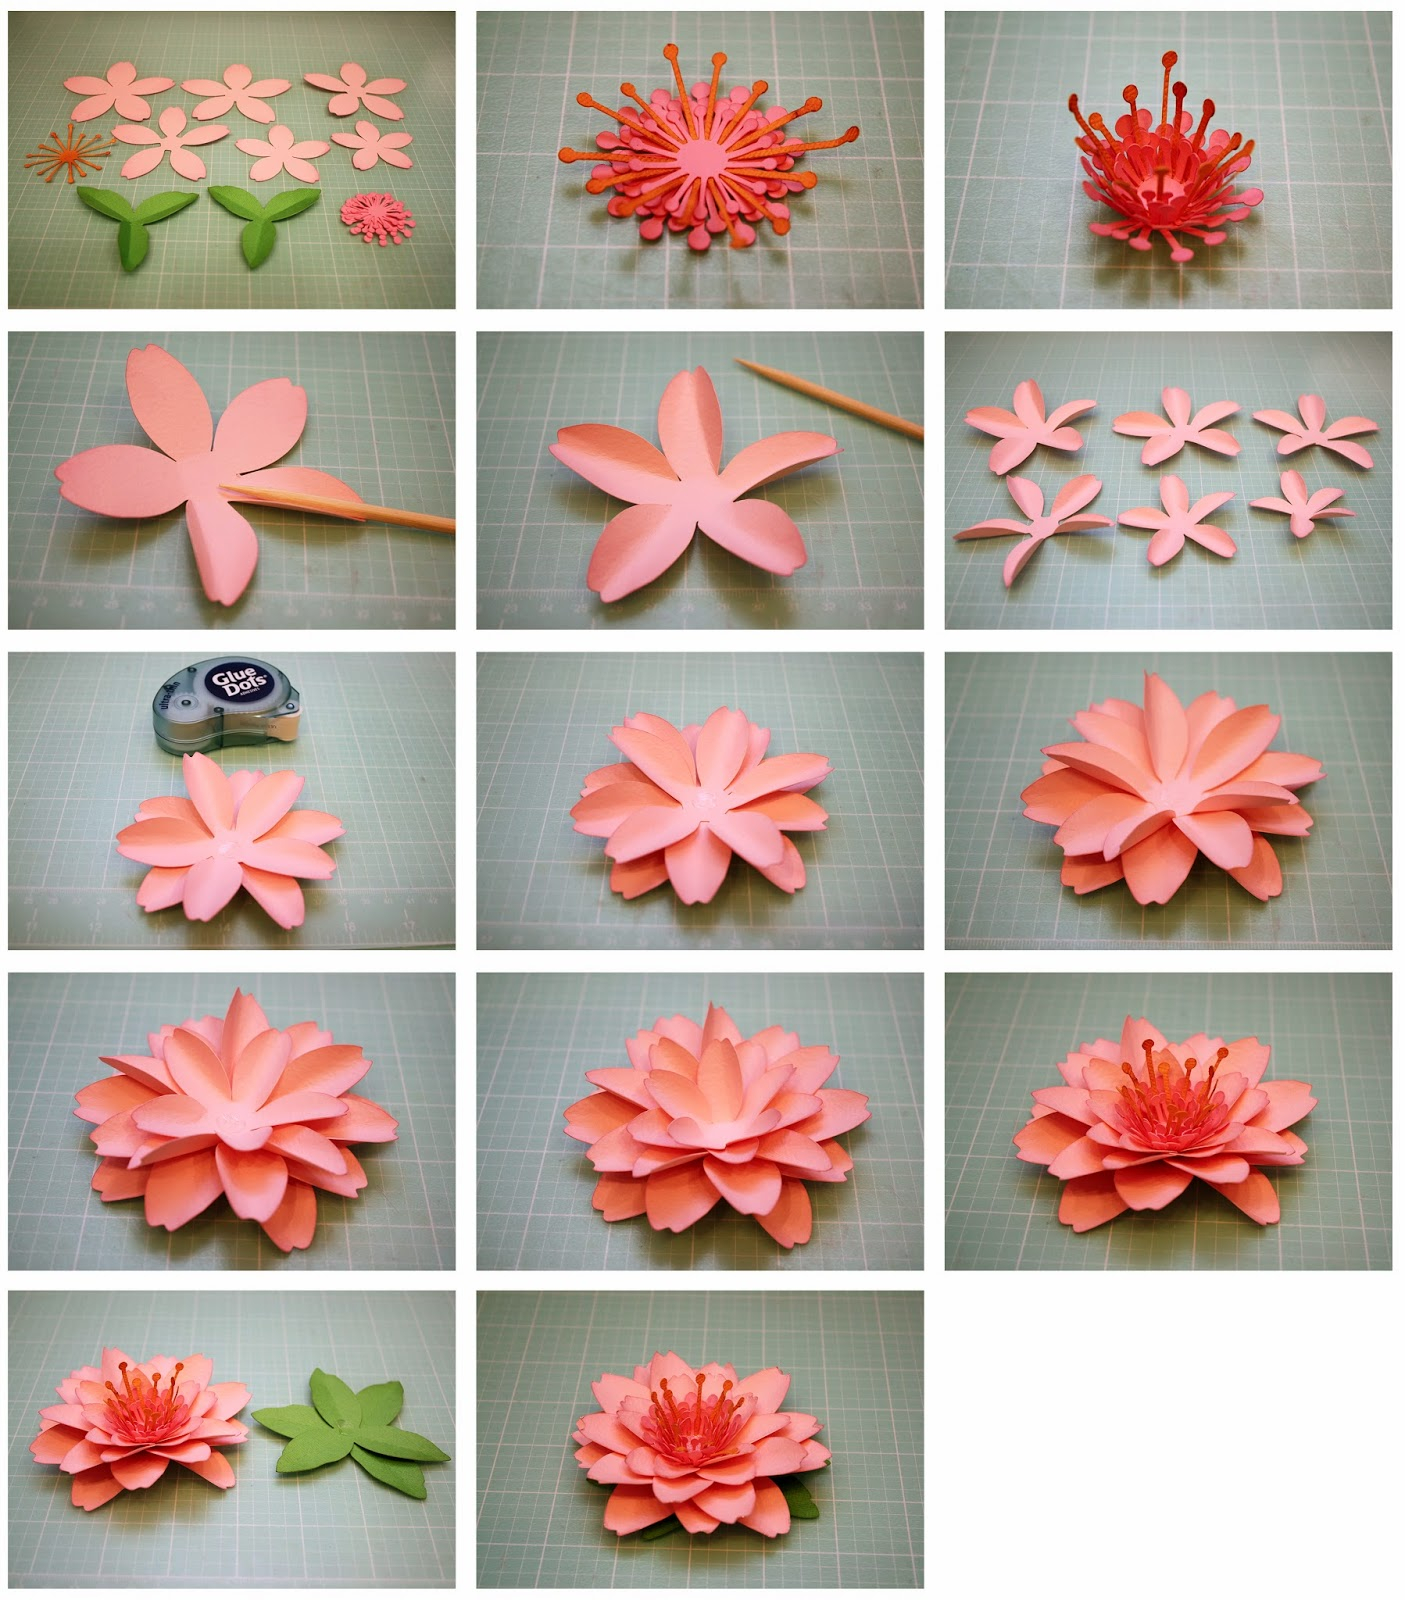 Paper Flower Origami 3D Model Bits Of Paper Cherry Blossom 3d Paper Flowers Diy Fun Tips